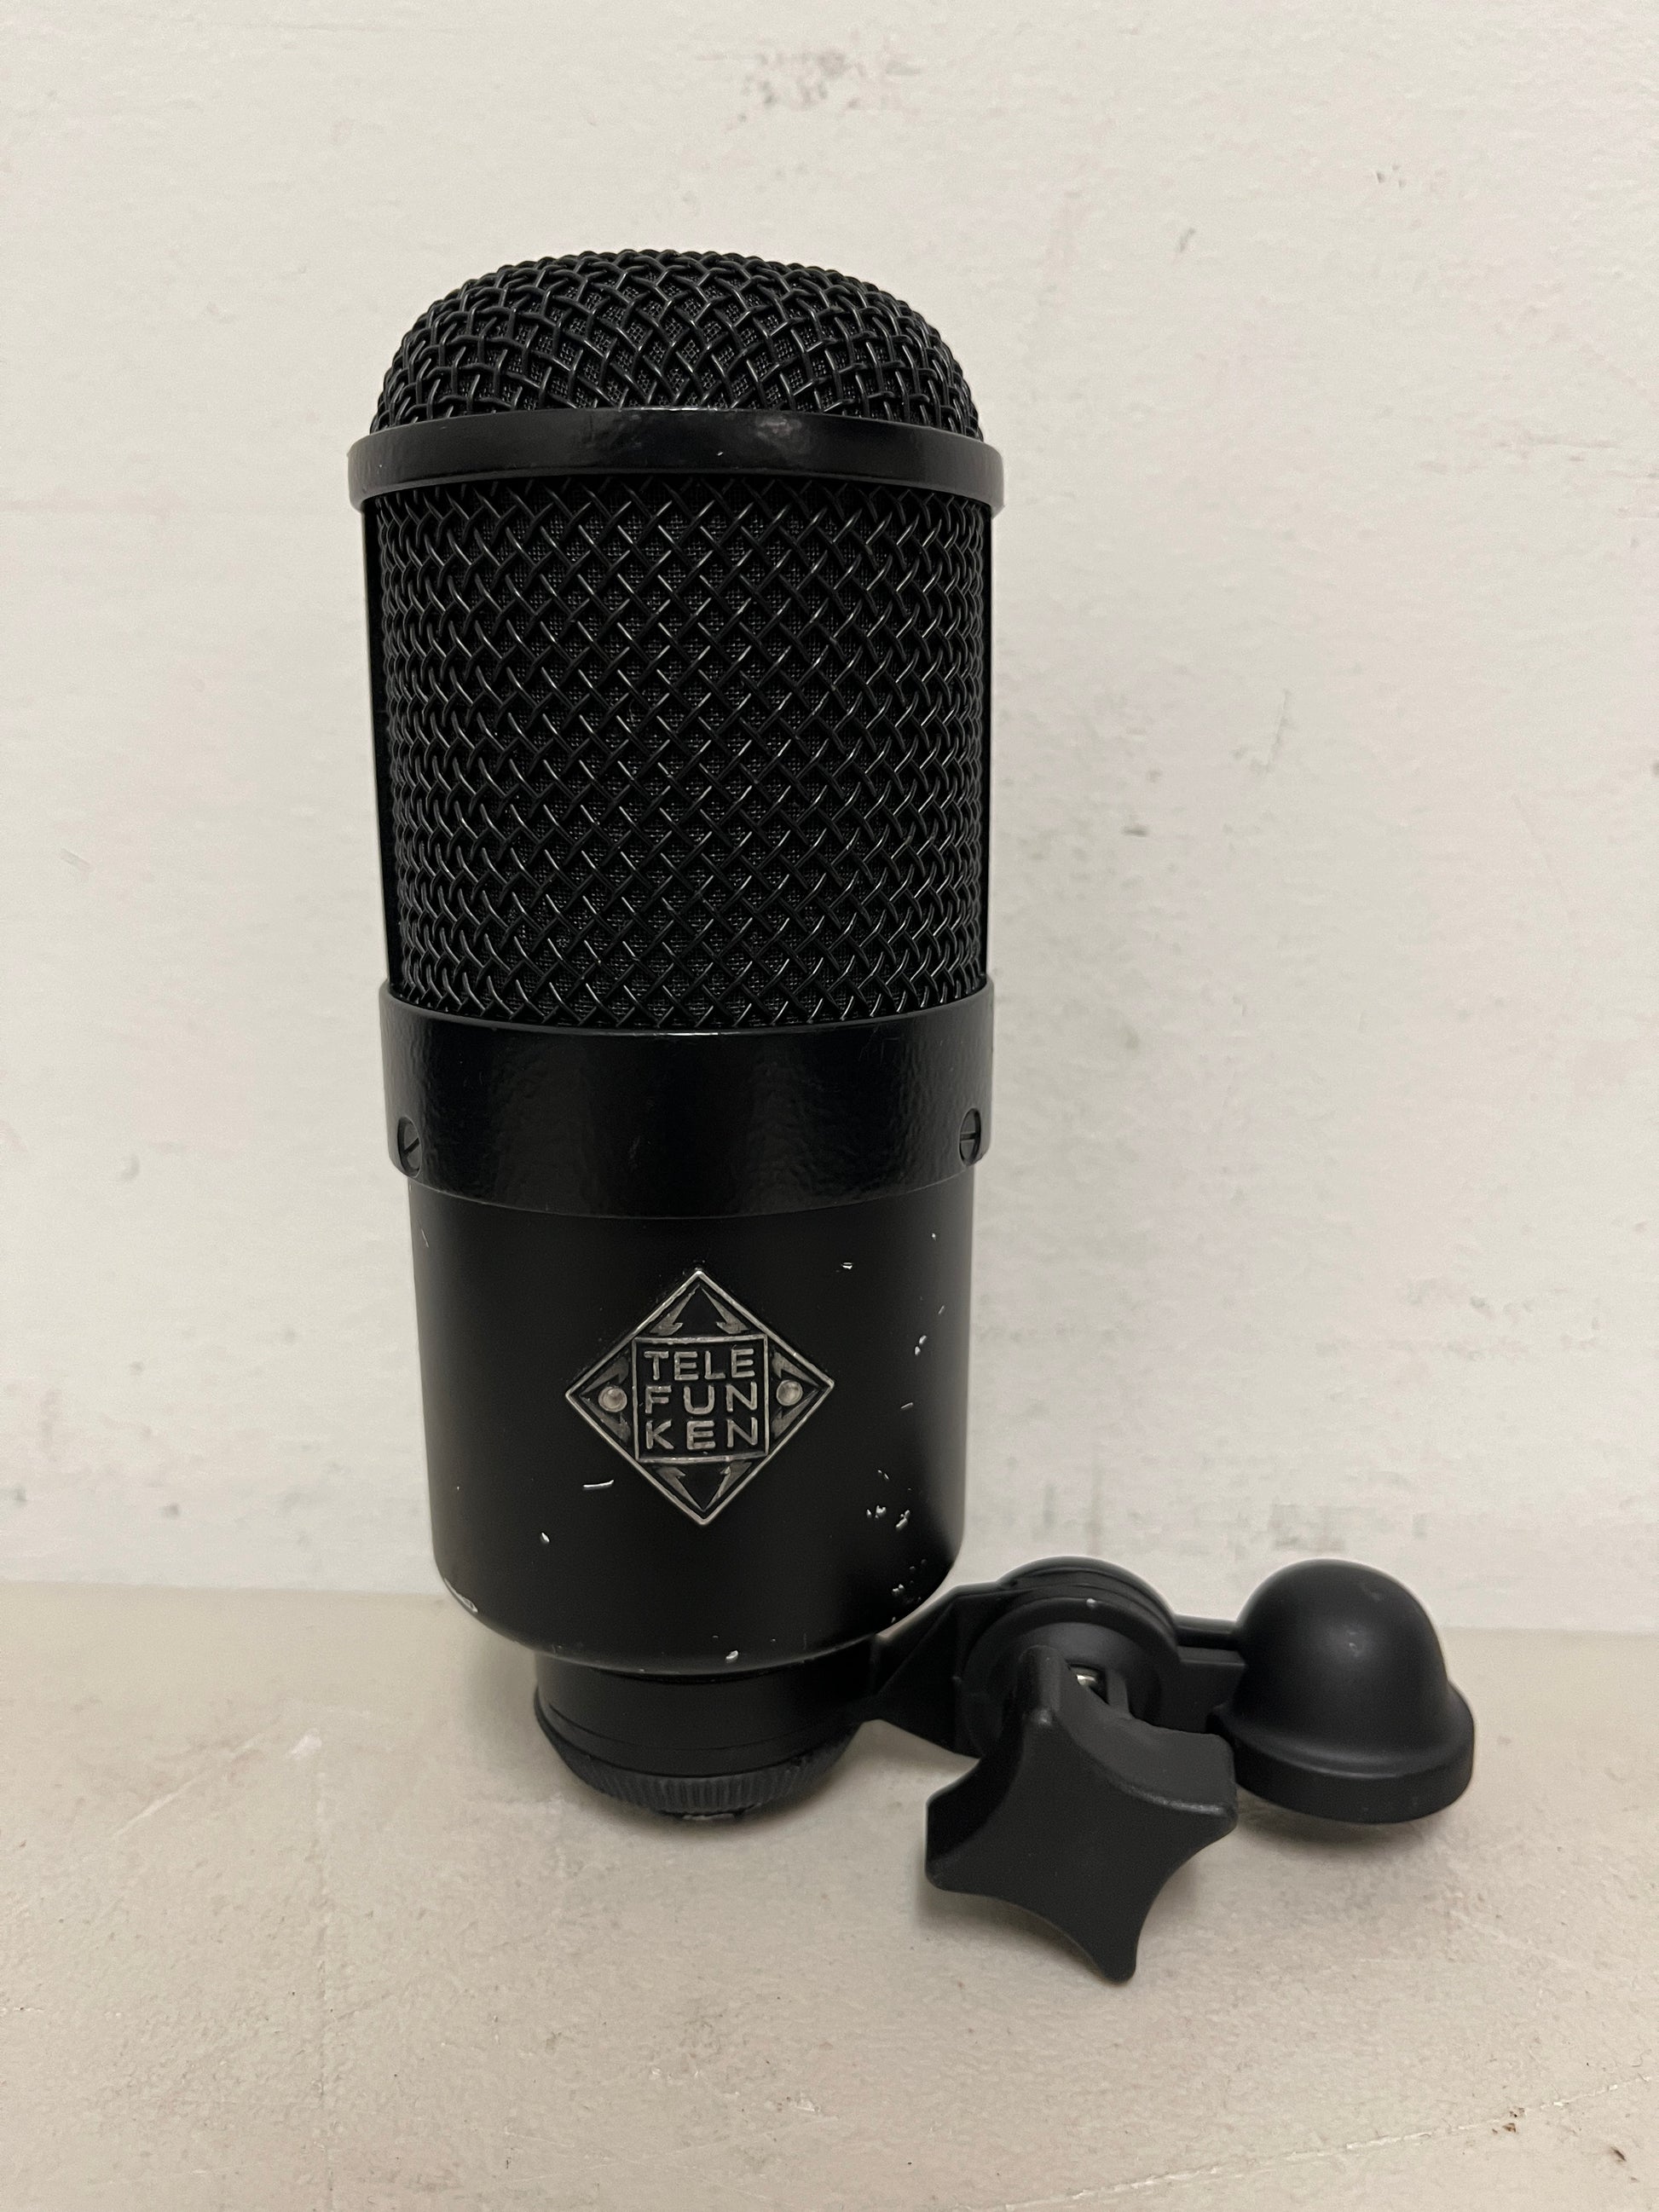 Used Telefunken M82 Cardioid Dynamic Kick Drum Microphone for Sale. We Sell Professional Audio Equipment. Audio Systems, Amplifiers, Consoles, Mixers, Electronics, Entertainment, Sound, Live.